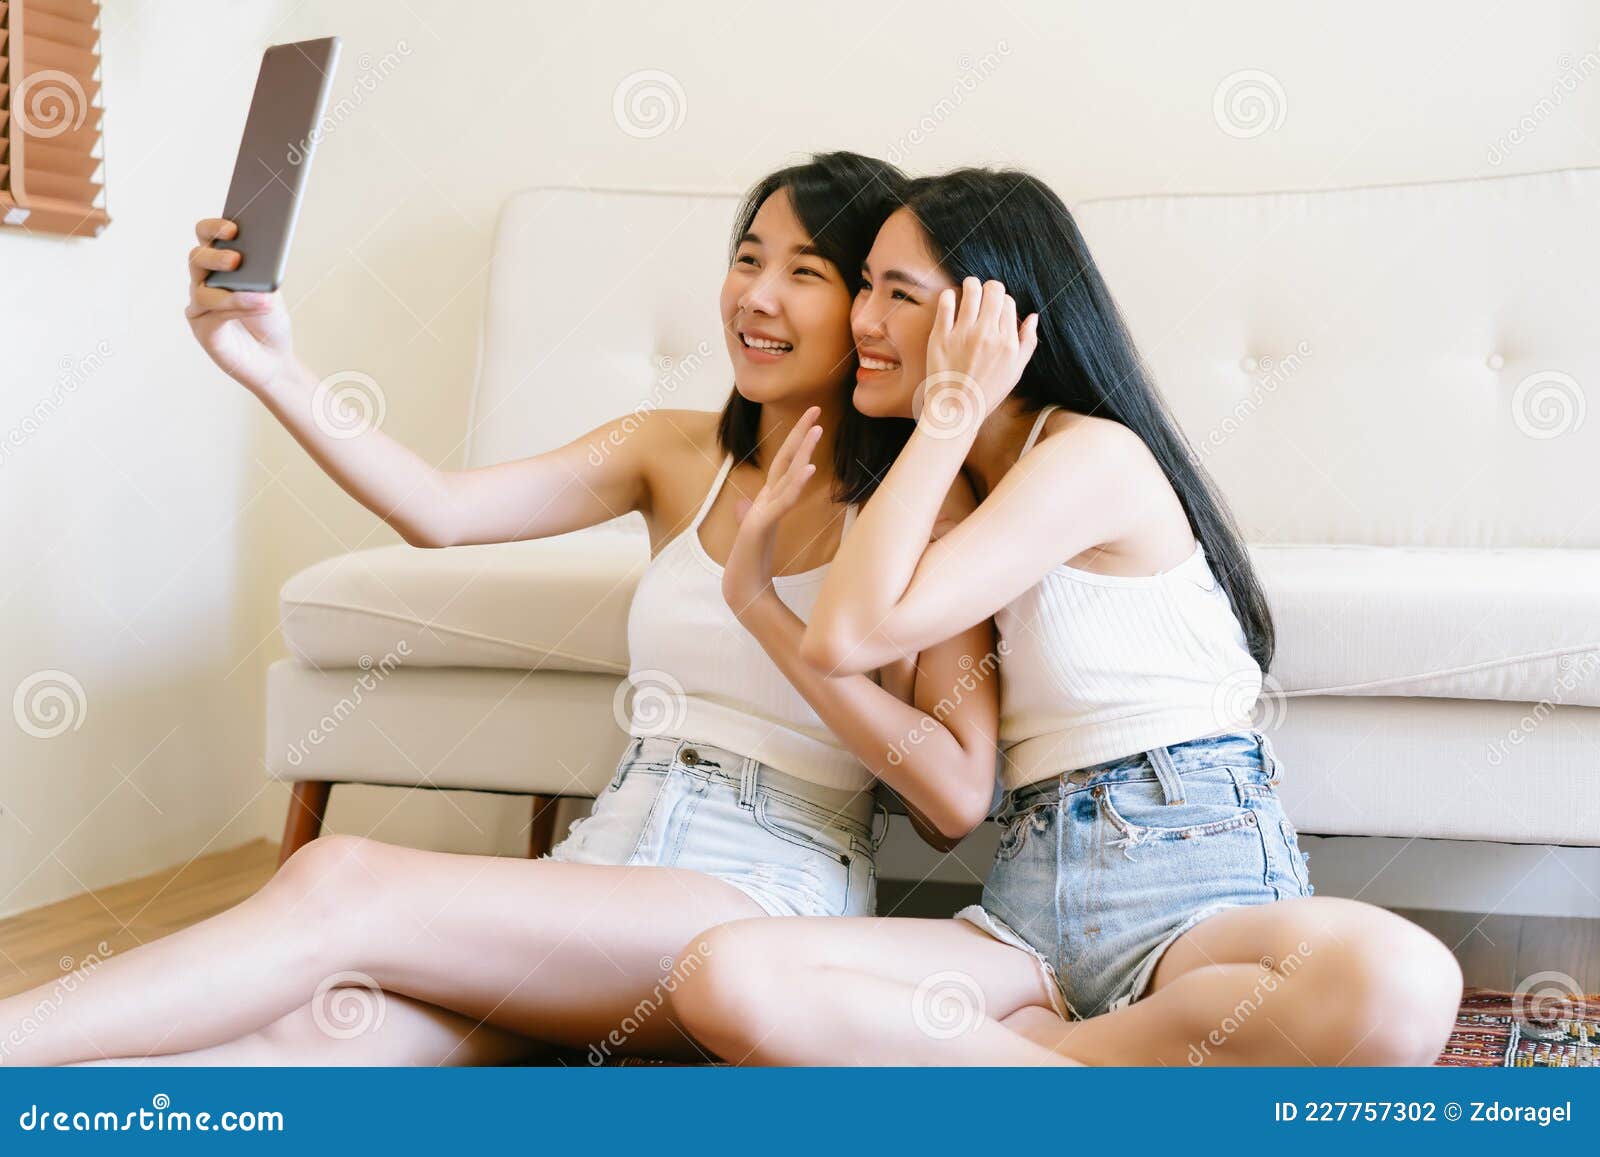 Two Beautiful Asian Girls or Lesbian Couple Setting on the Floor and Waving Hands Making Distance Video Call Looking at Digital Stock Photo